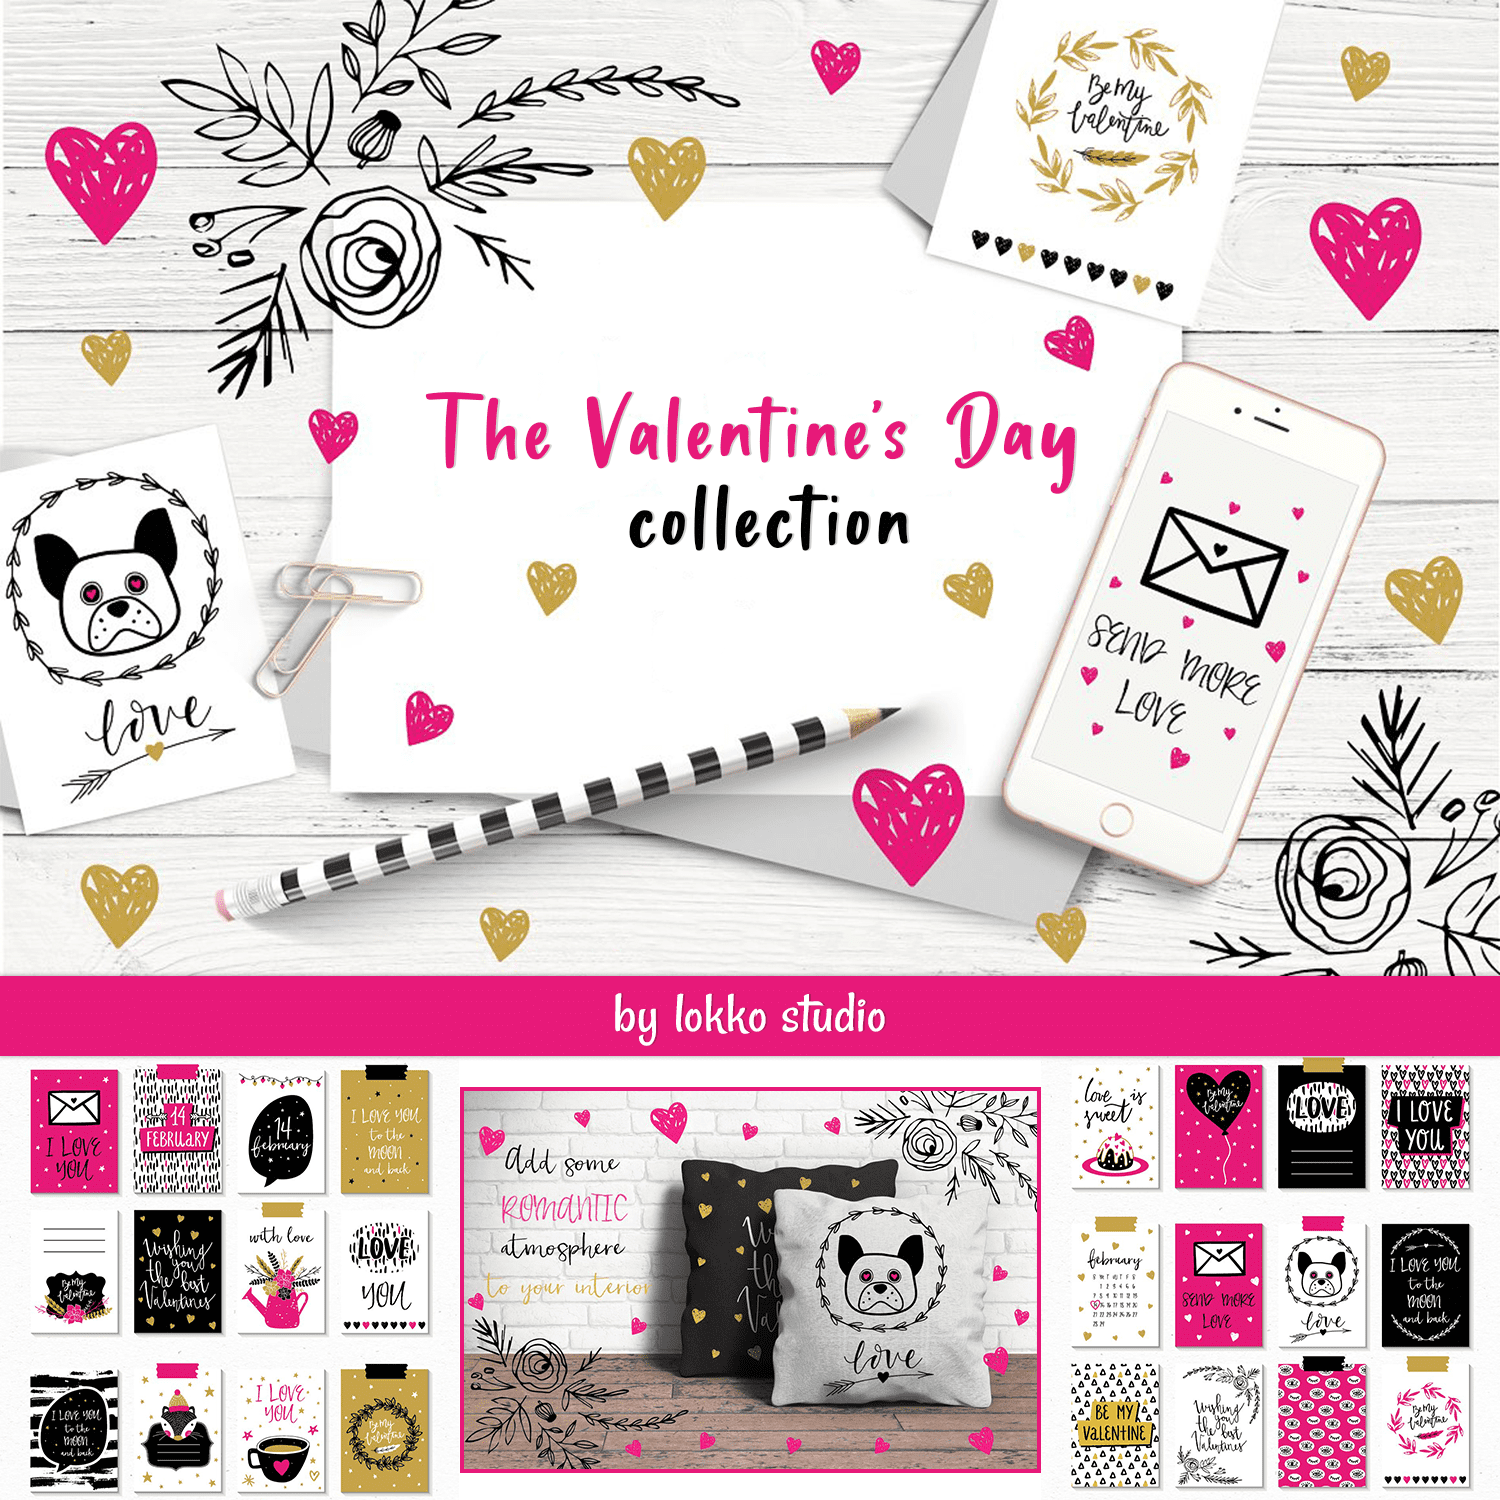 The Valentine's Day collection cover.